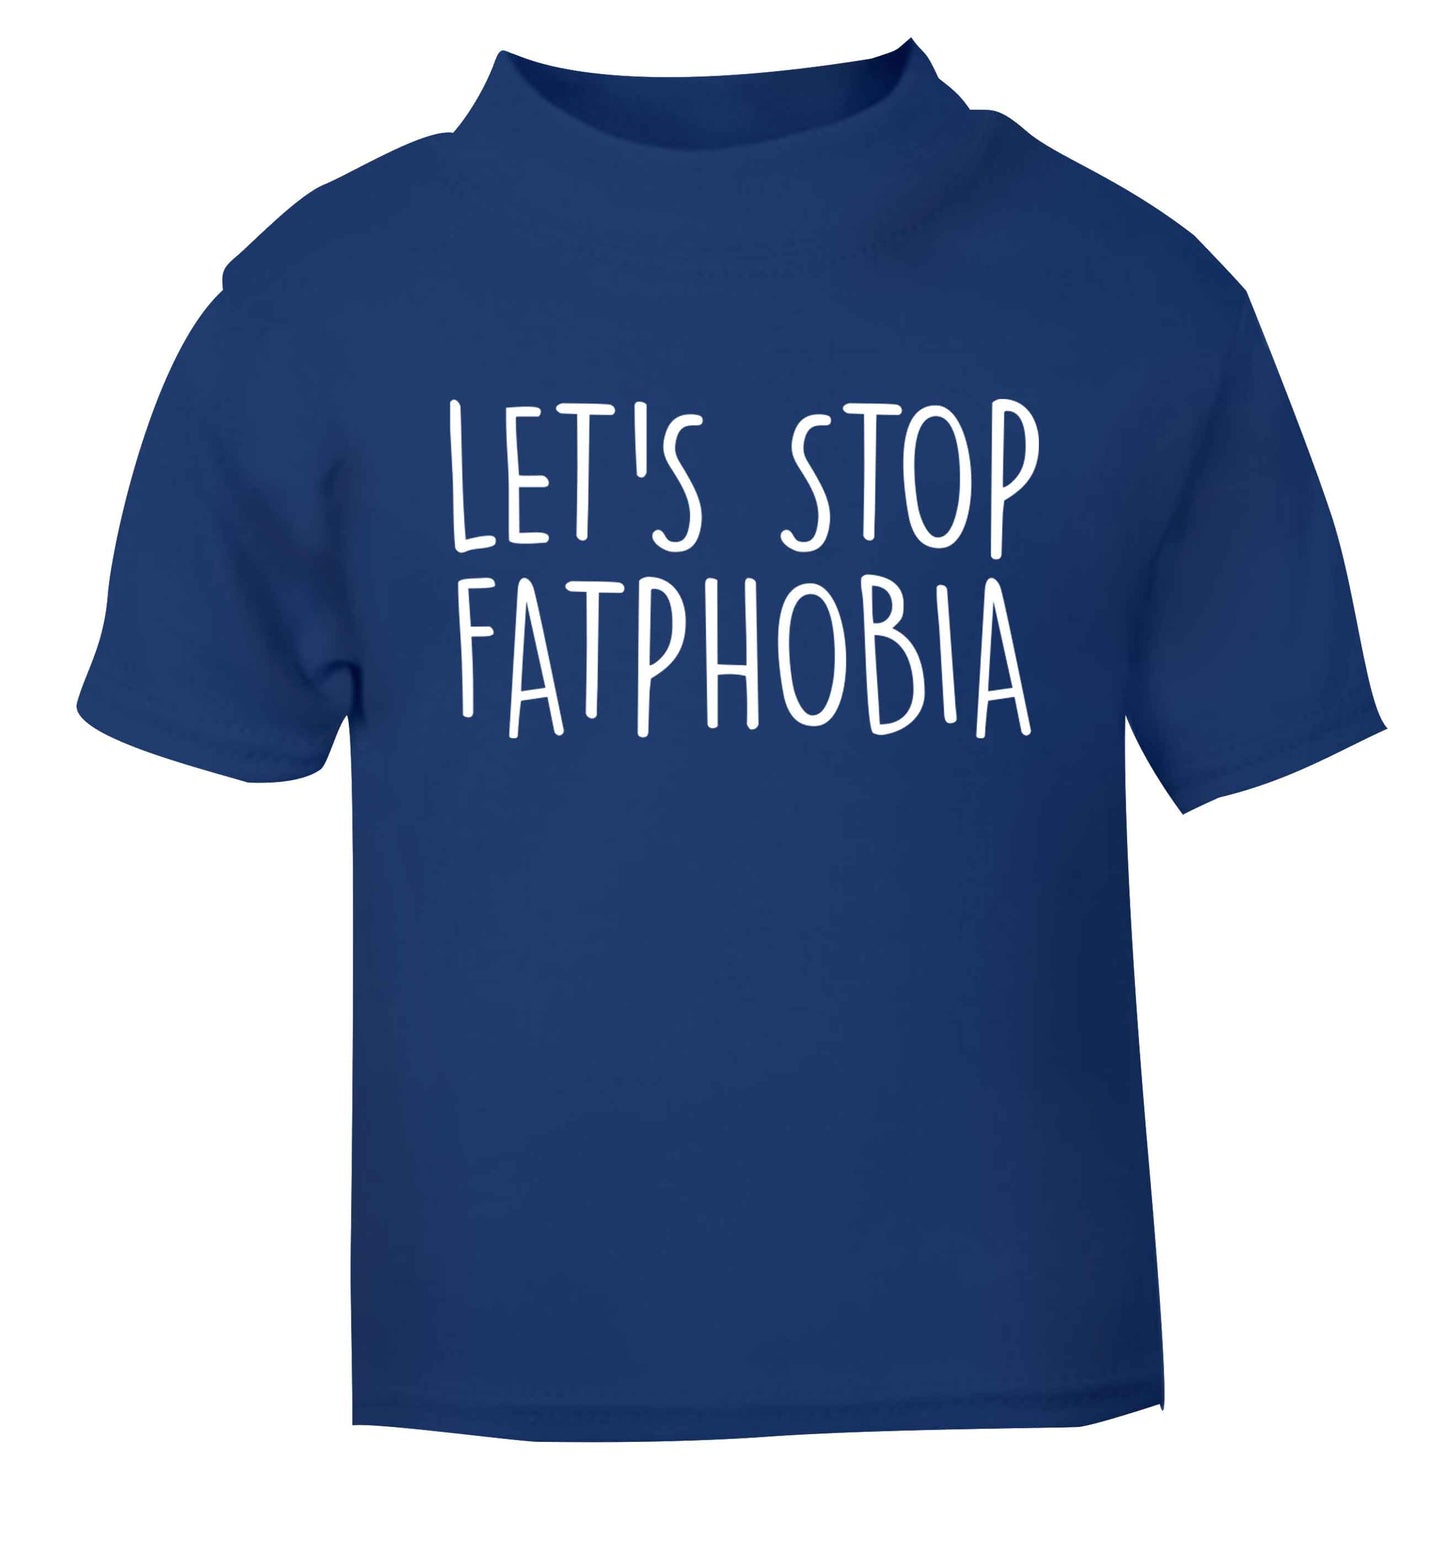 Let's stop fatphobia blue baby toddler Tshirt 2 Years